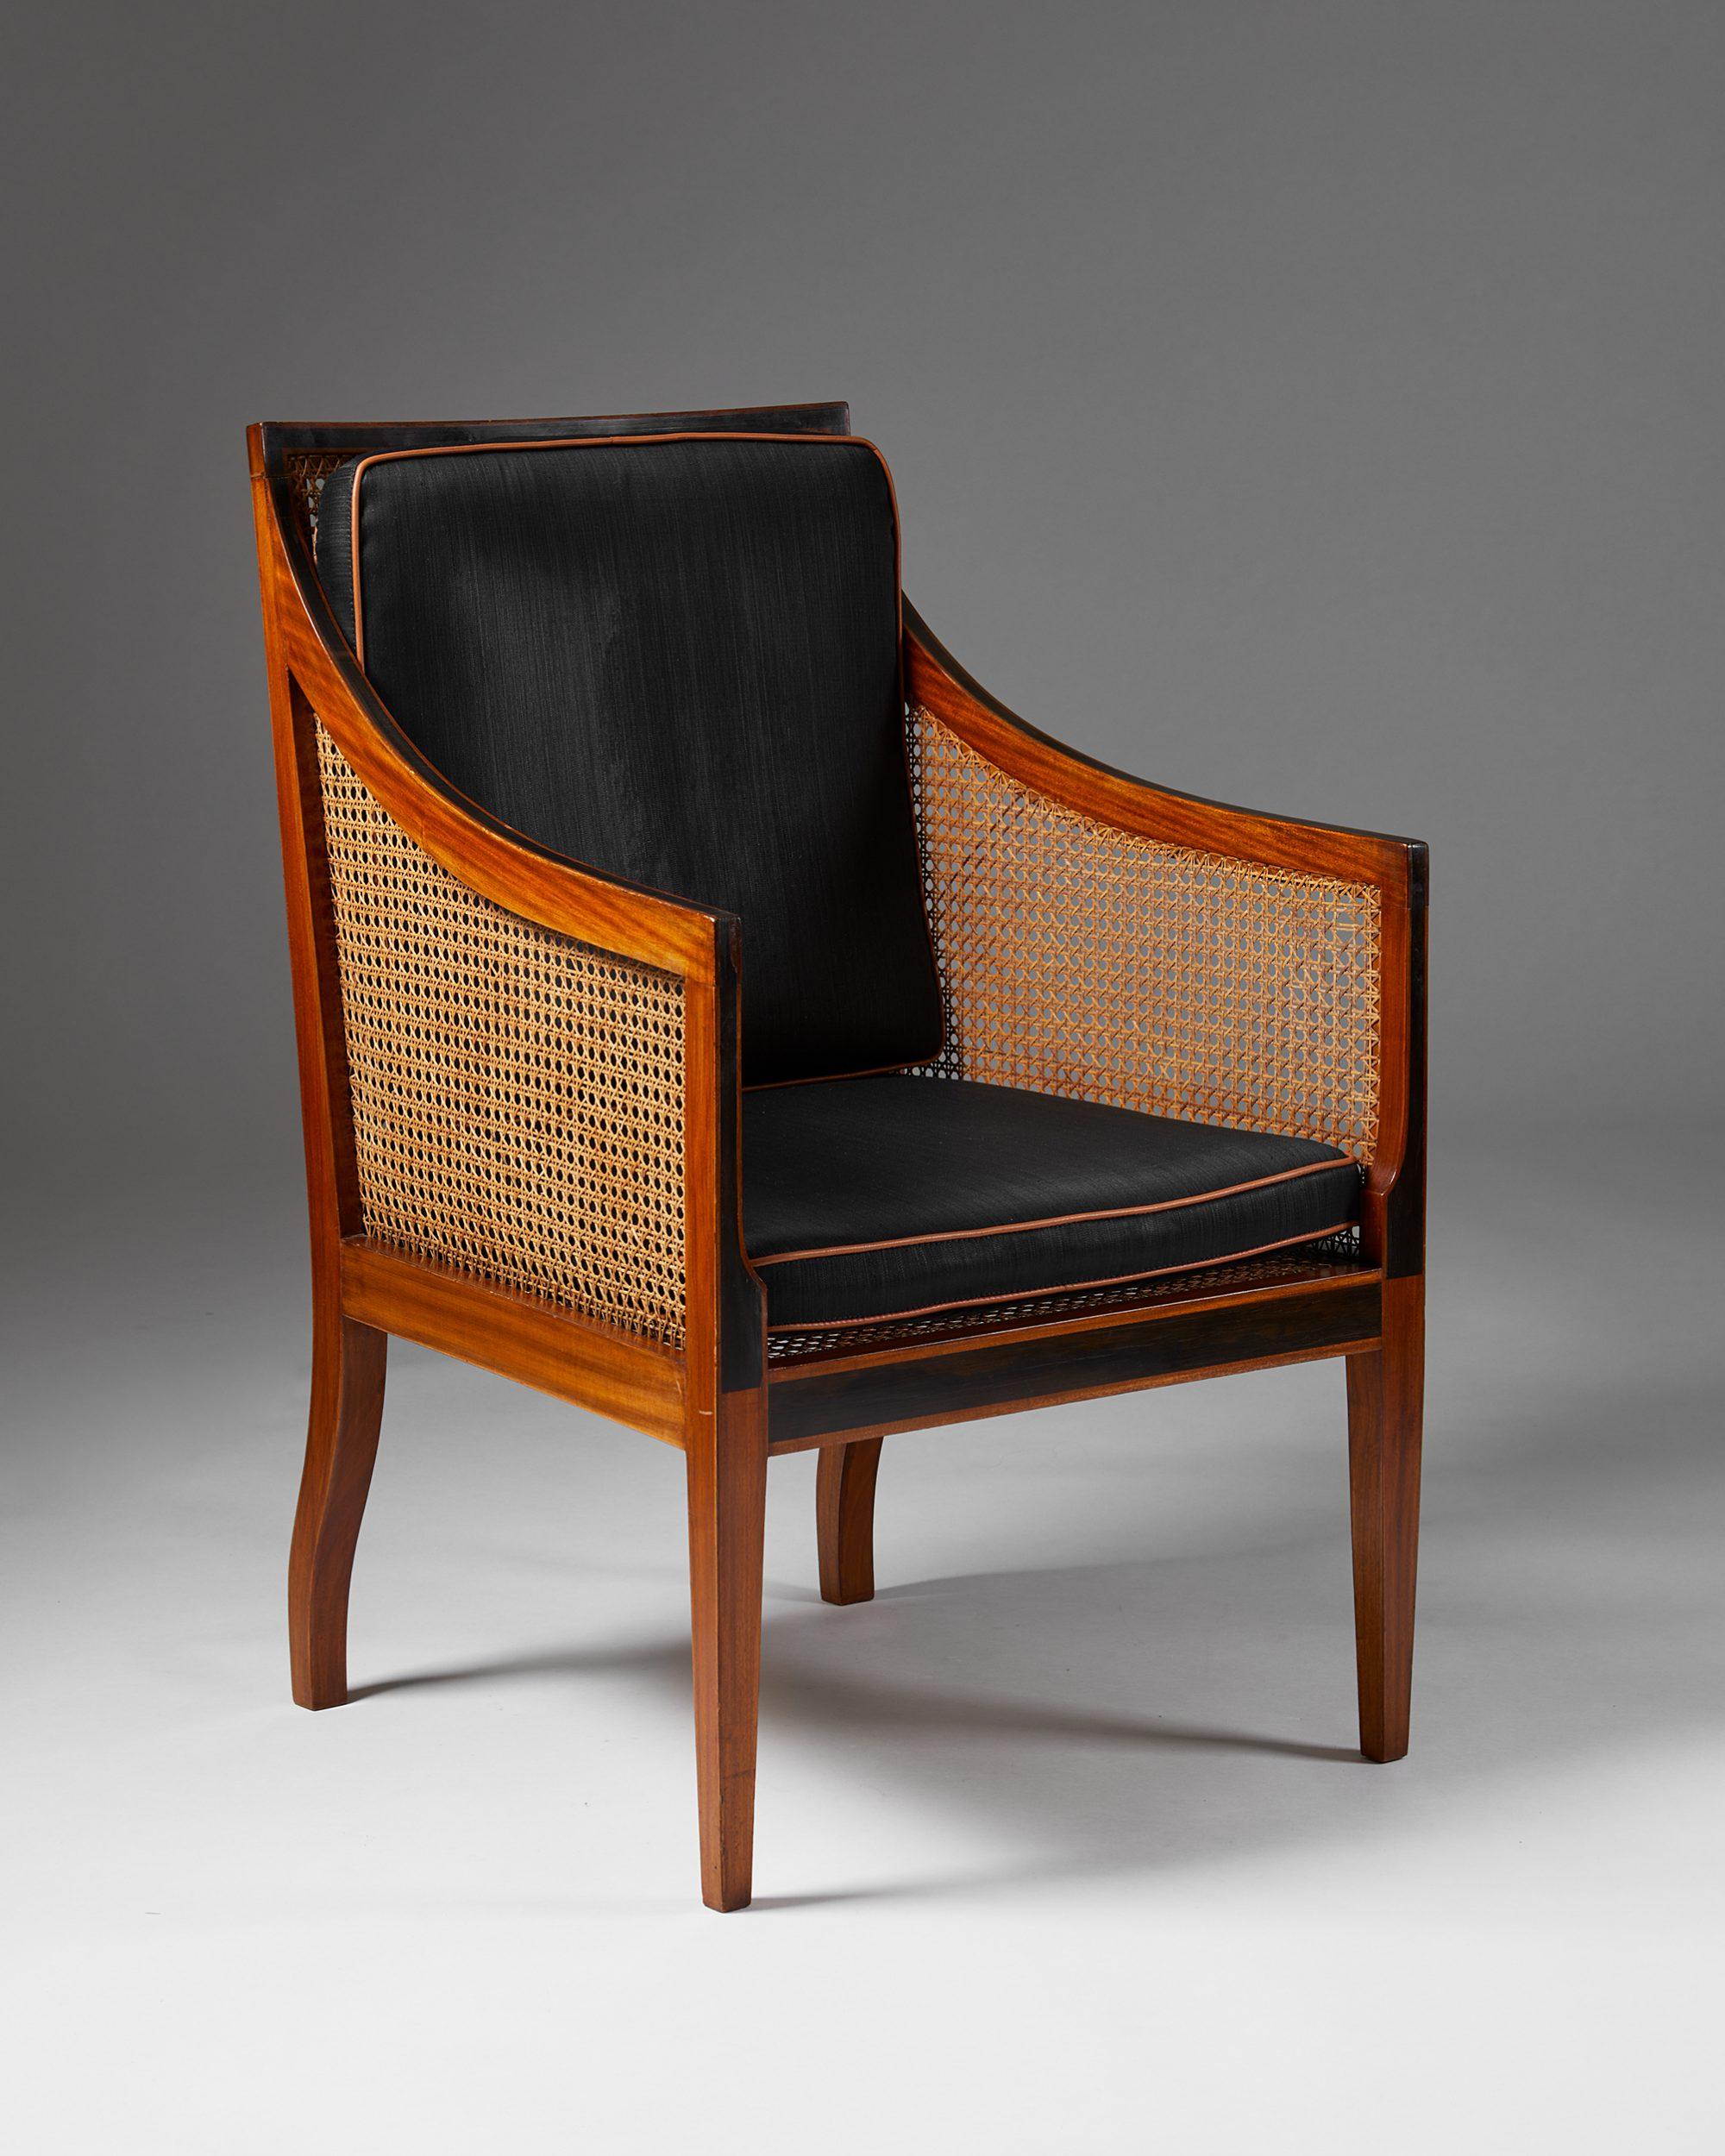 Armchair model 4488 designed by Kaare Klint for Rud. Rasmussen,
Denmark, 1930s.

Mahogany, ebony, cane, and black horsehair upholstery with cognac leather piping.

Klint thought his friend’s 18th-century chair from England, which he often sat